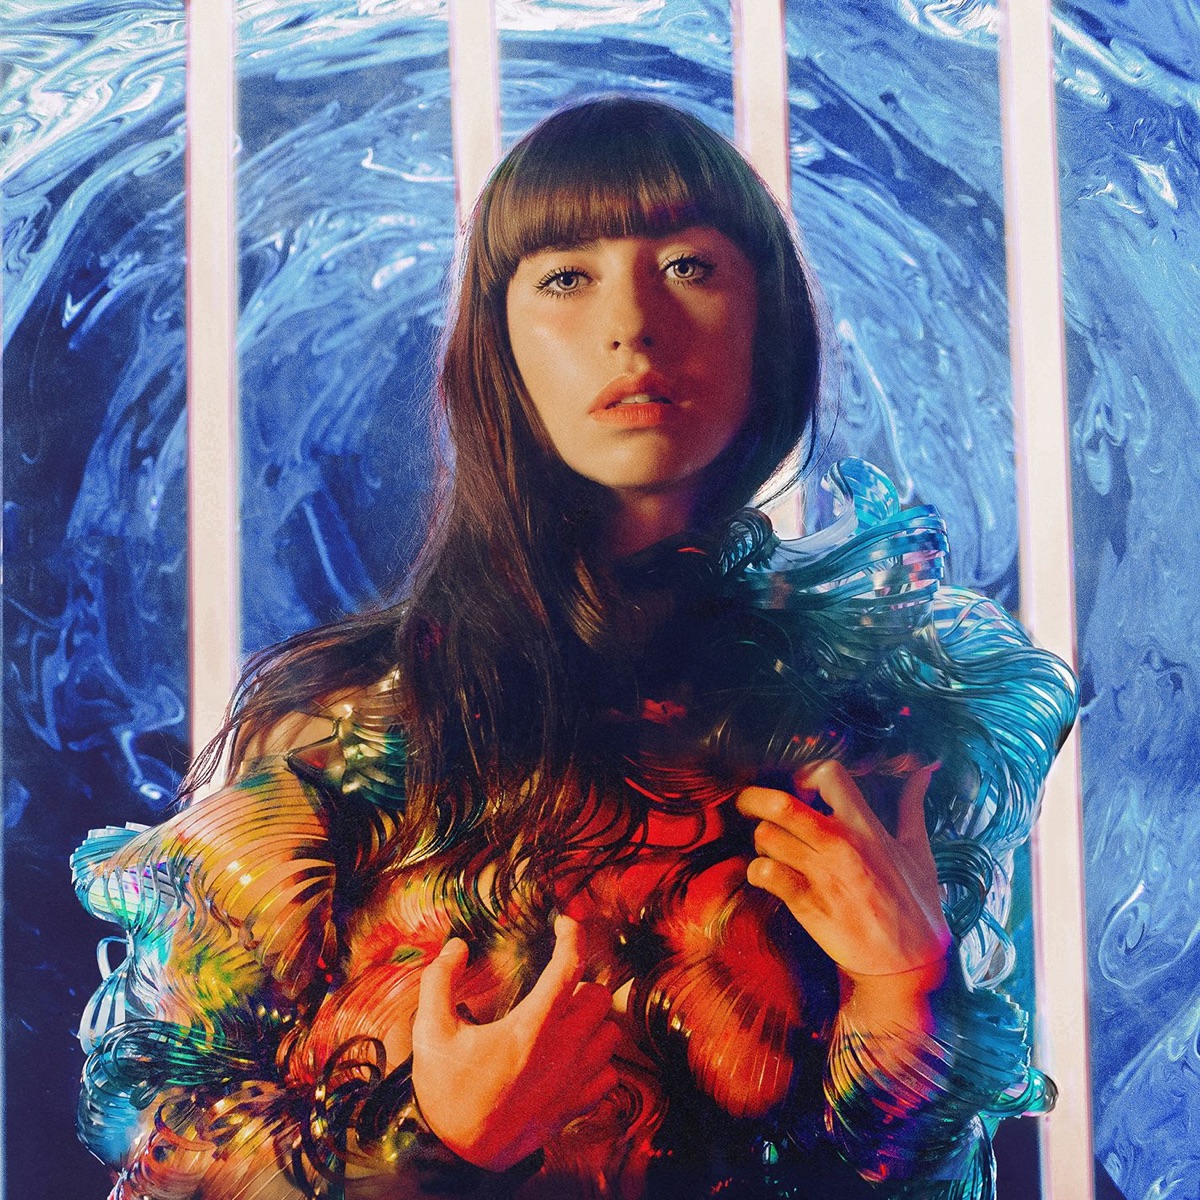 Settle Down - EP - Album by Kimbra - Apple Music